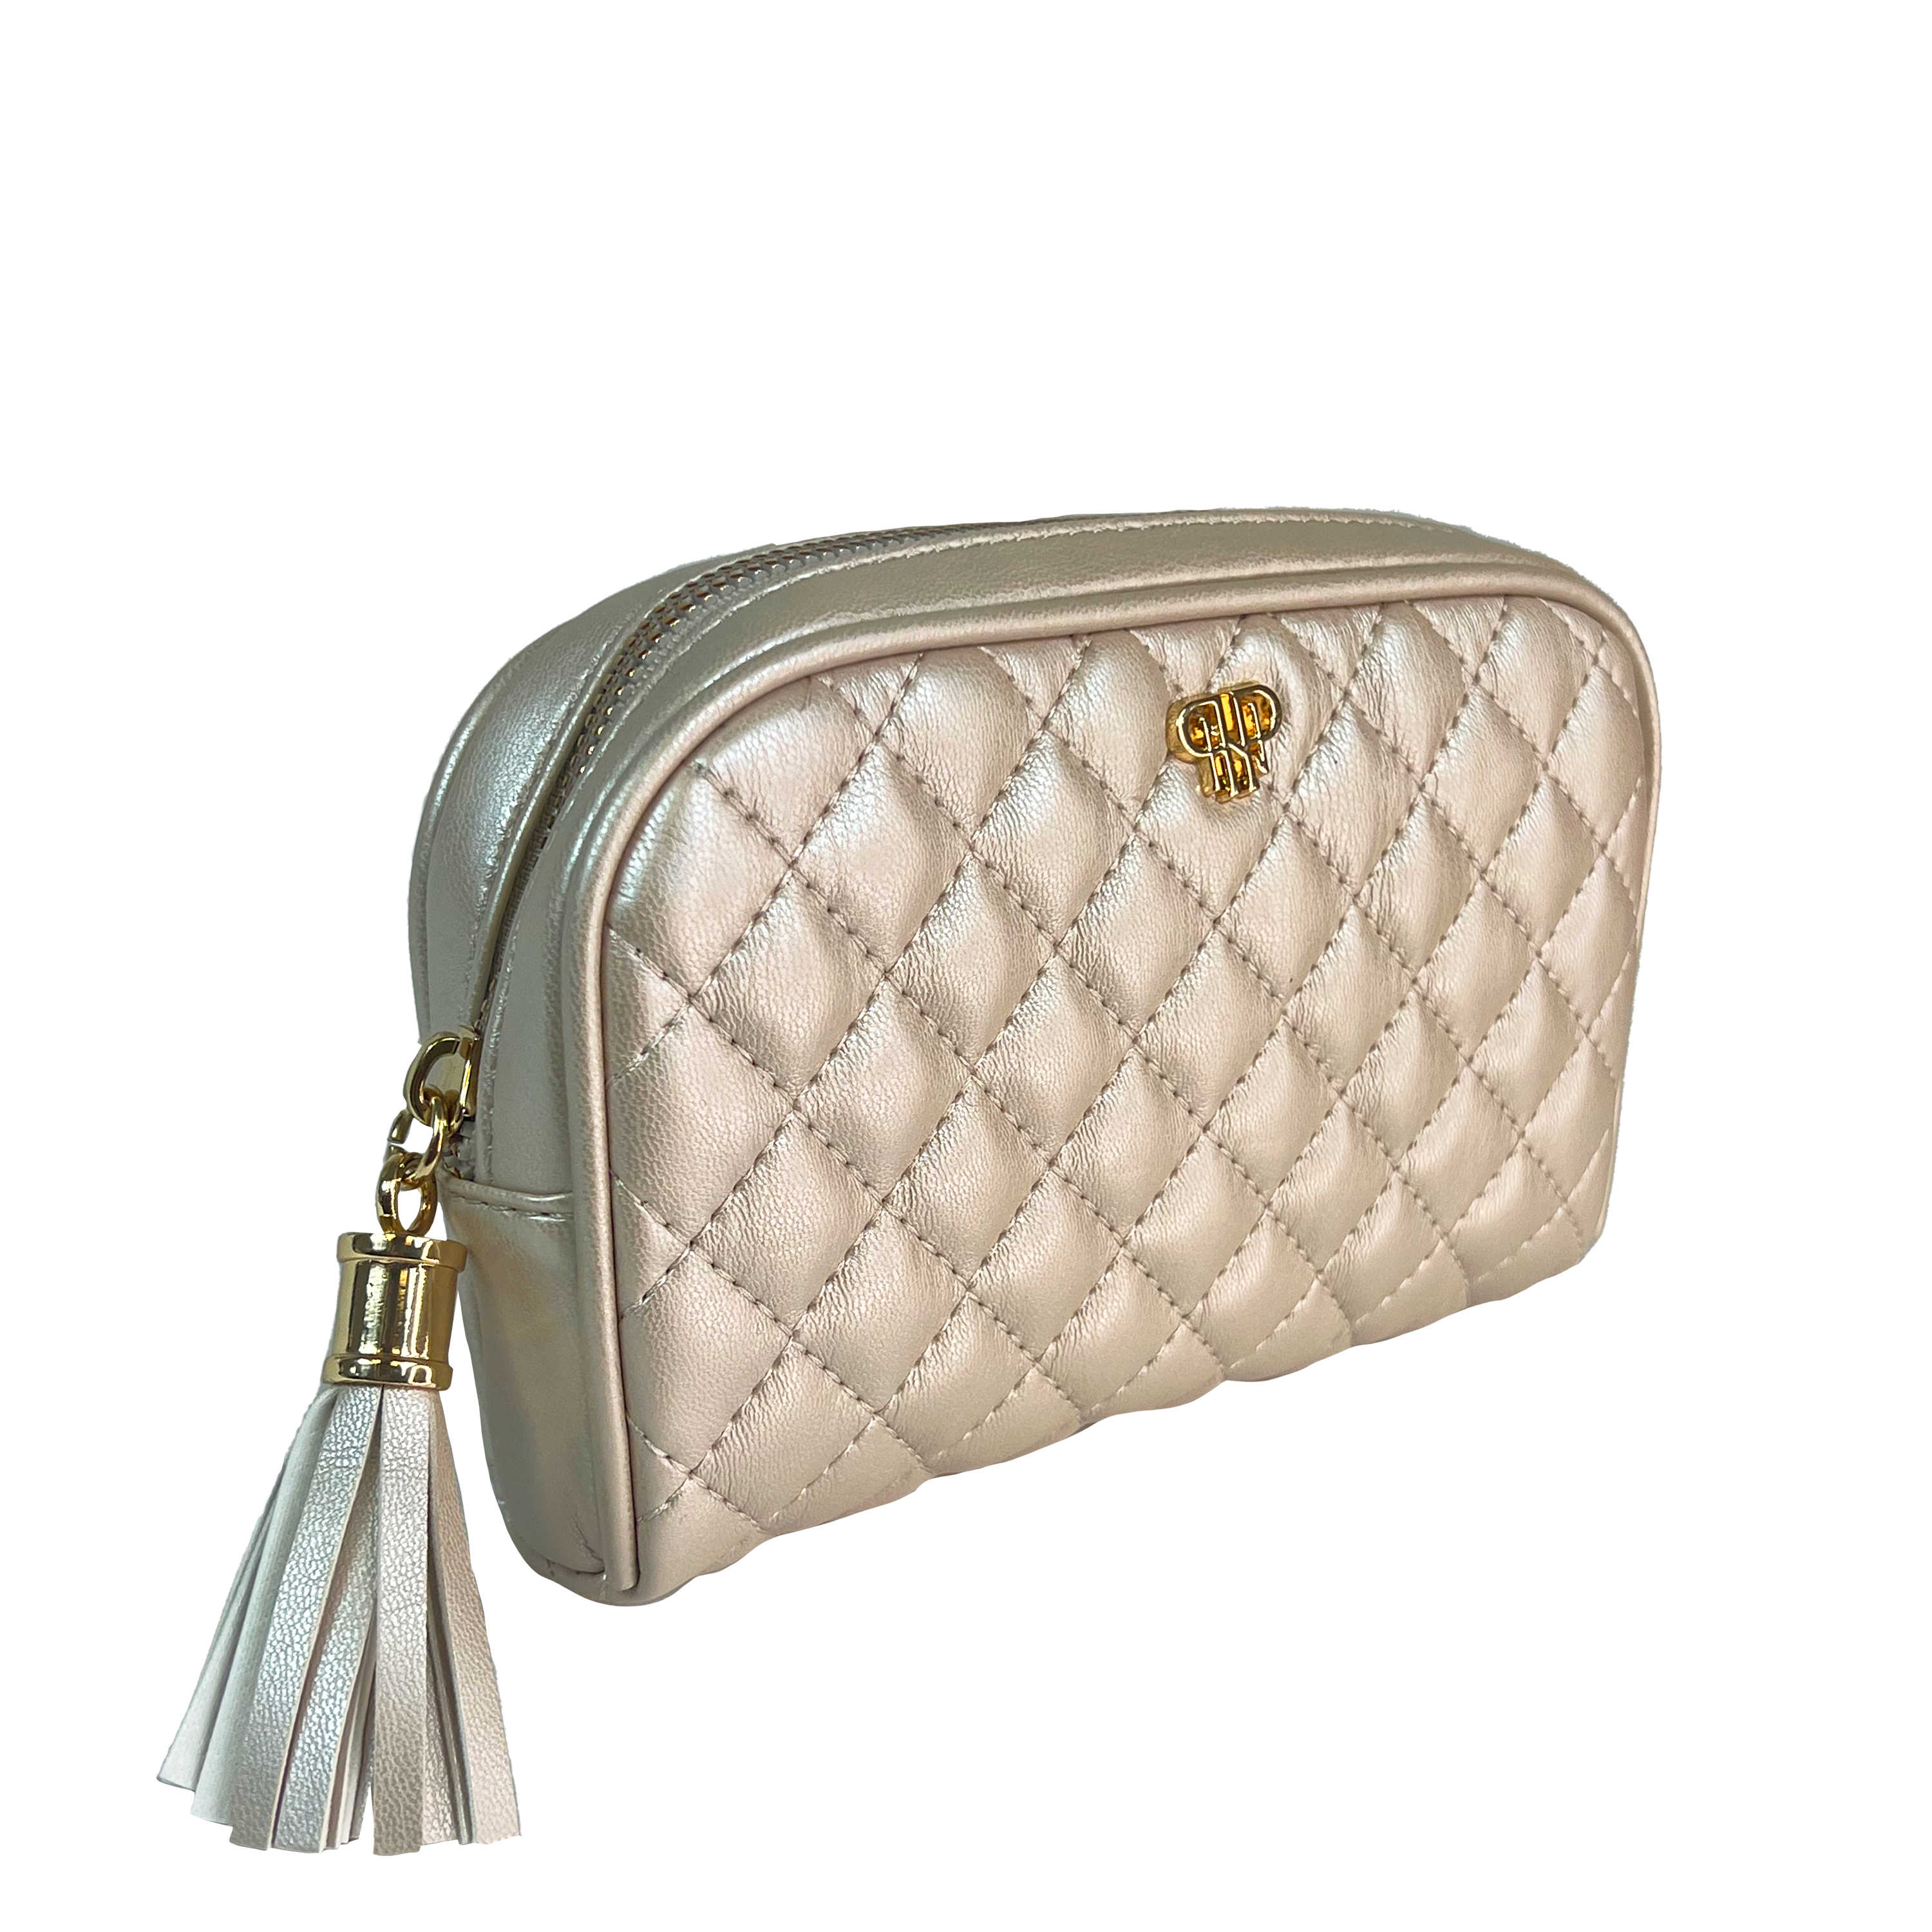 Small Makeup Bag - Pearl Quilted